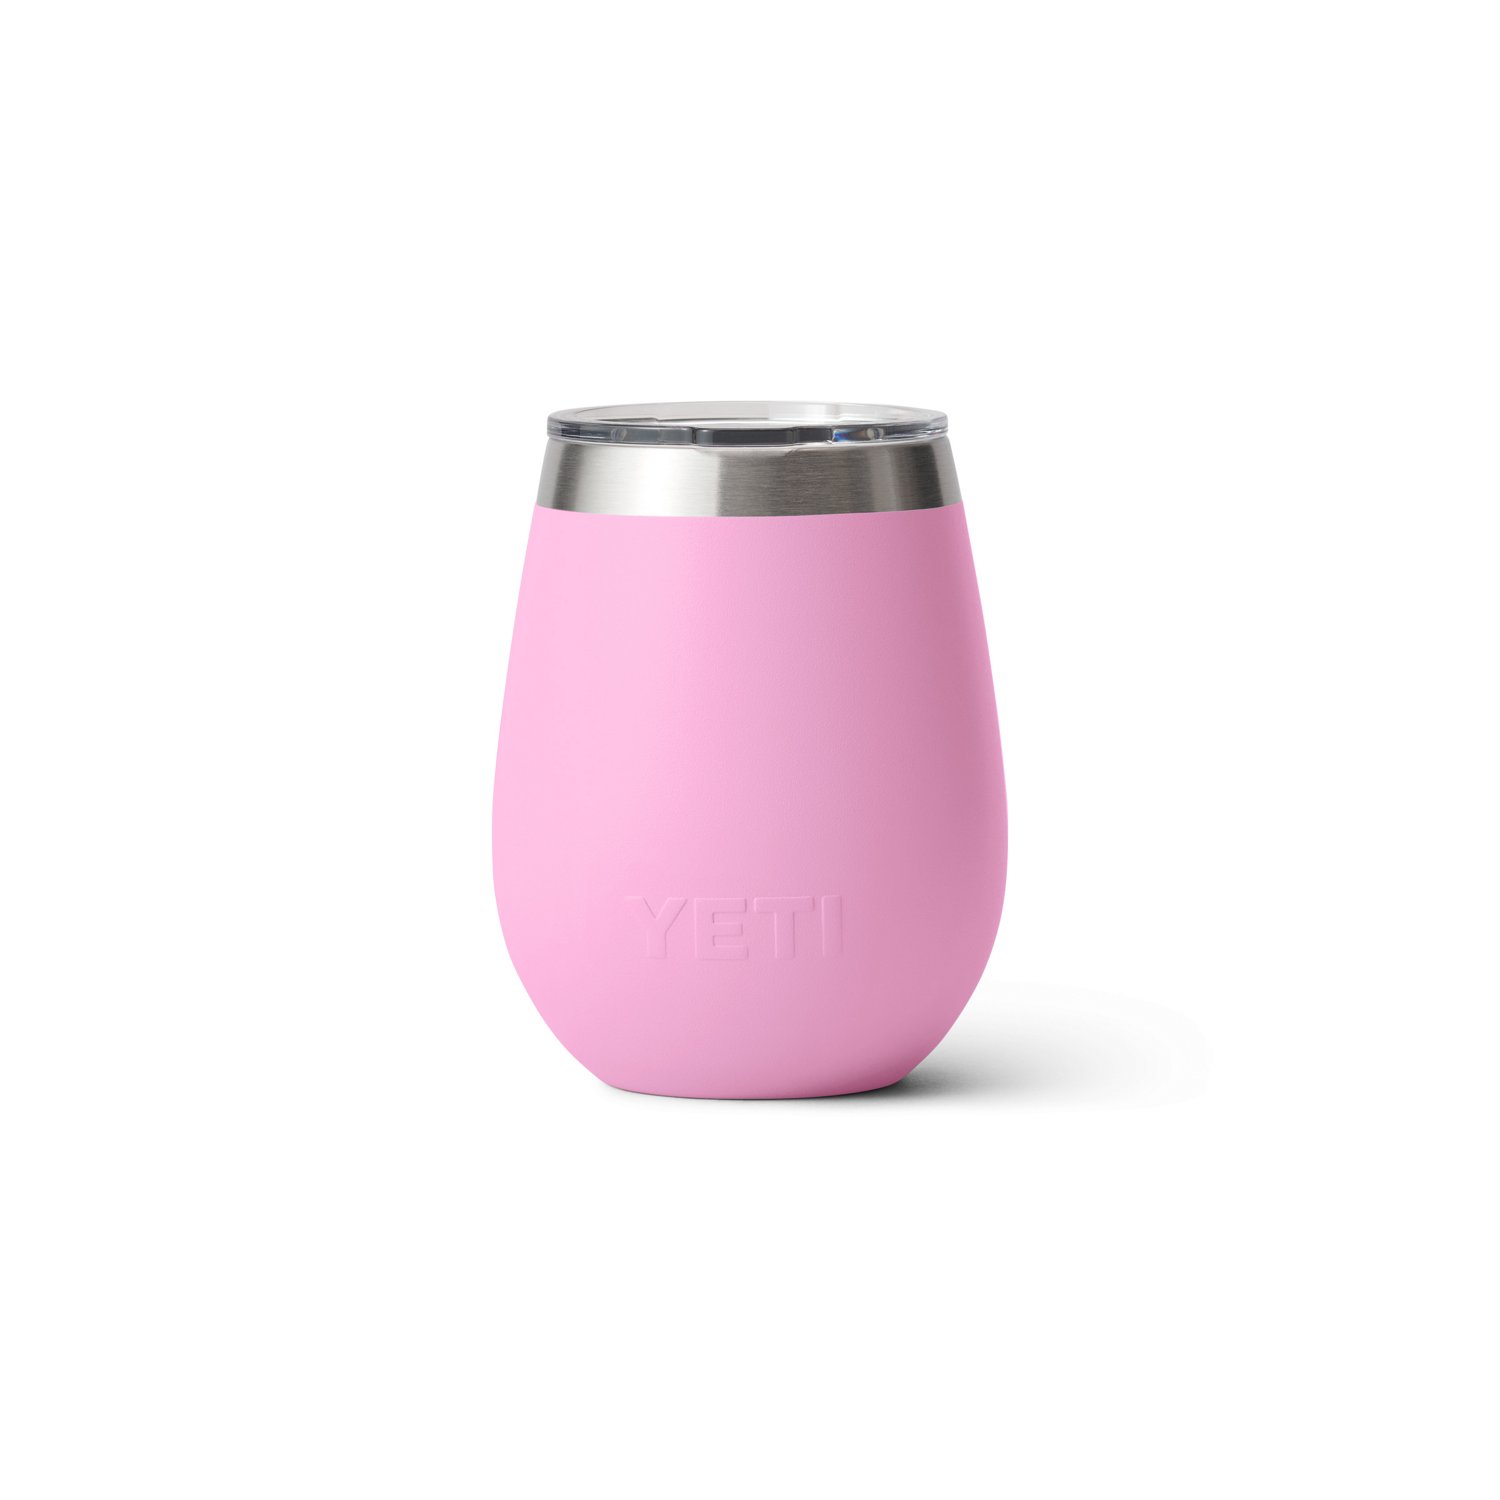 https://academy.scene7.com/is/image/academy//drinkware/yeti-rambler-10-oz-wine-tumbler-with-magslider-lid-21071501927-pink/ee54f60023f74450bd3479a3e03a9f49?$pdp-mobile-gallery-ng$